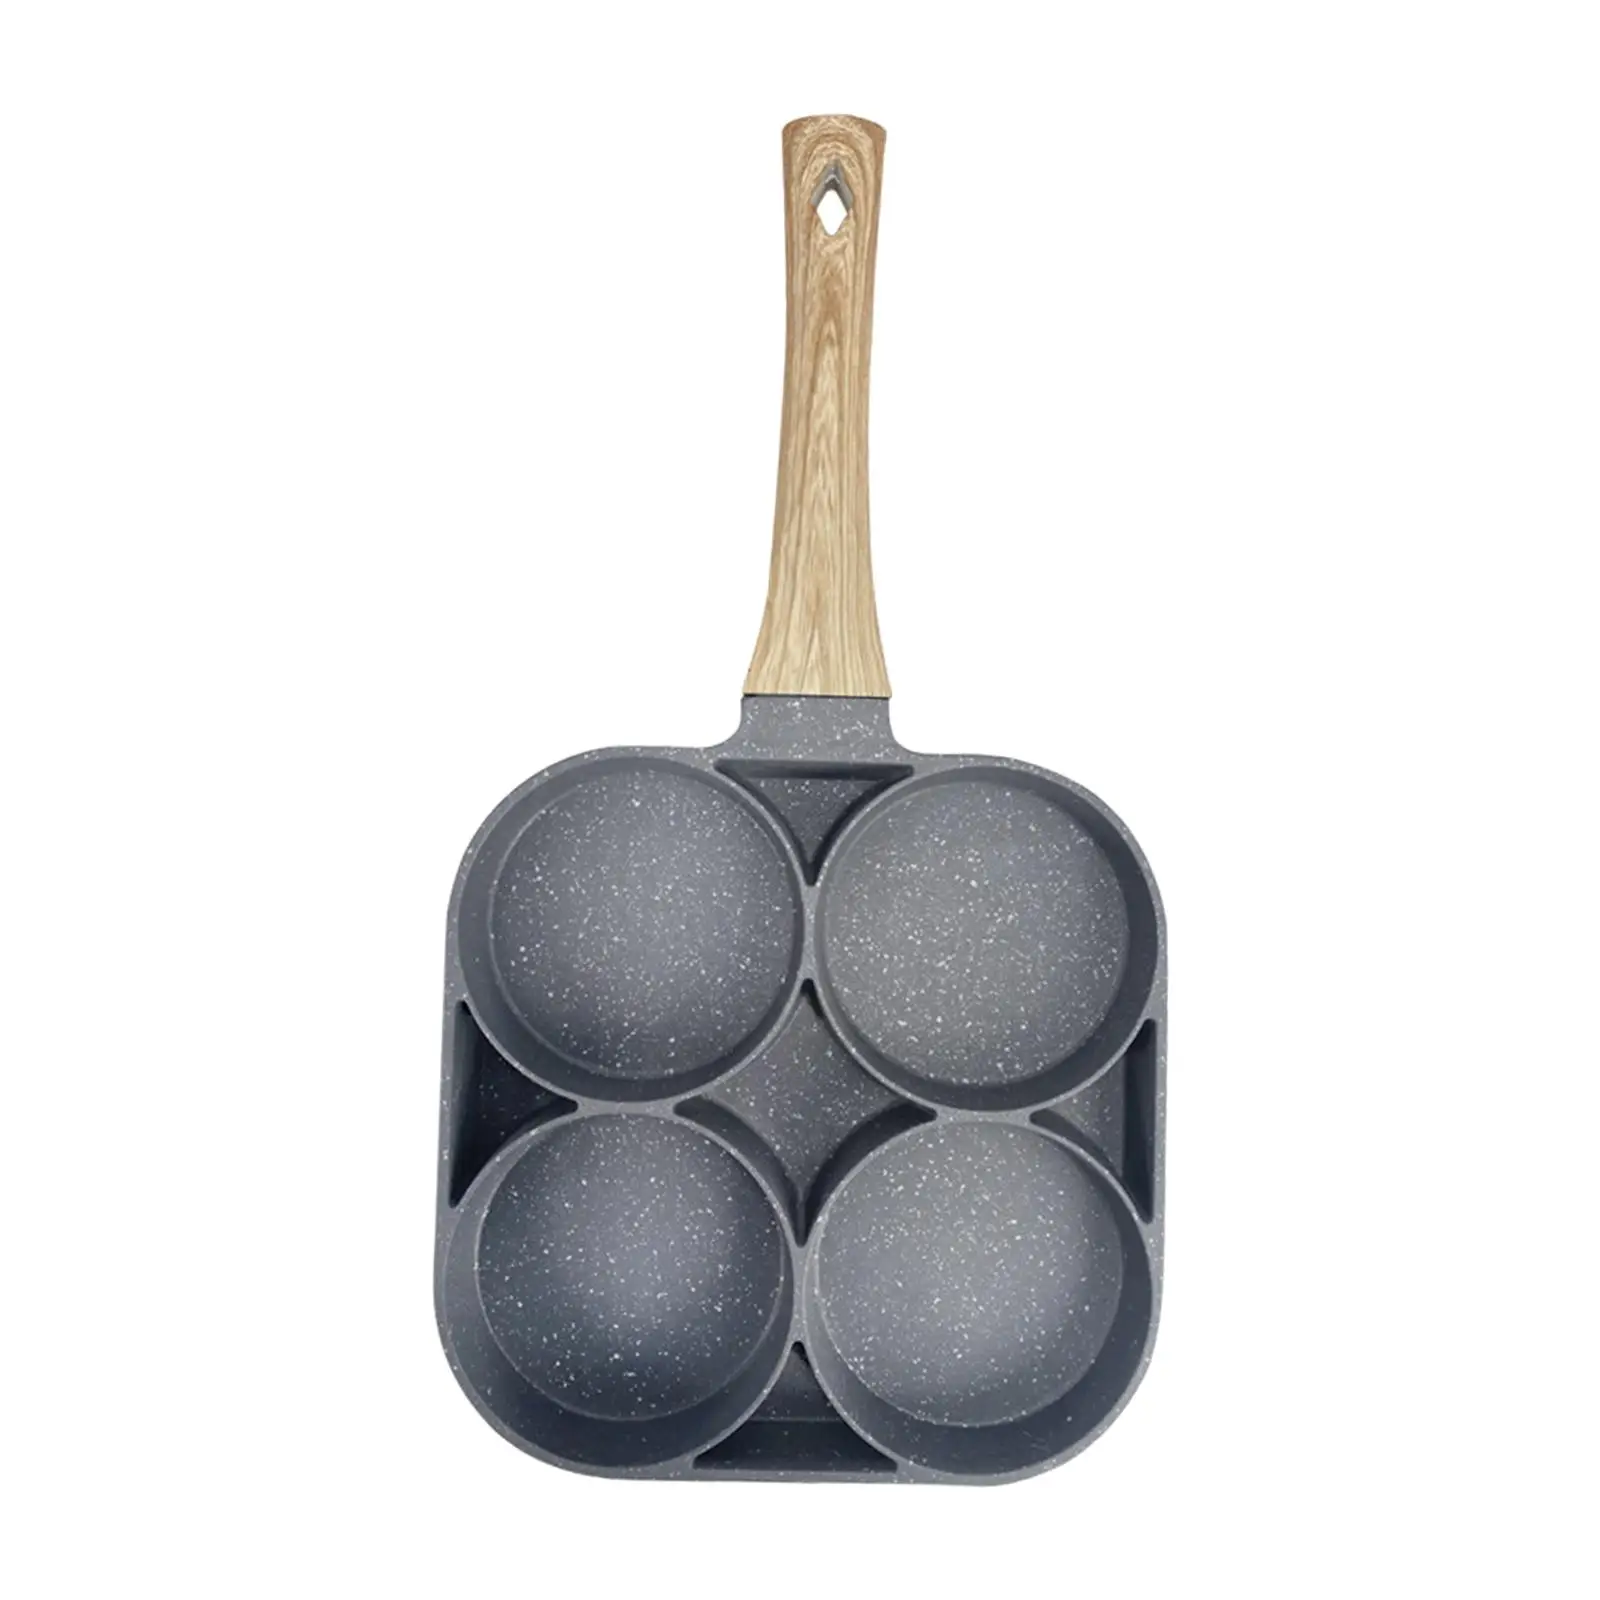 Fried Egg Pan with Removable Anti Scald Handle Frying Pan for Breakfast